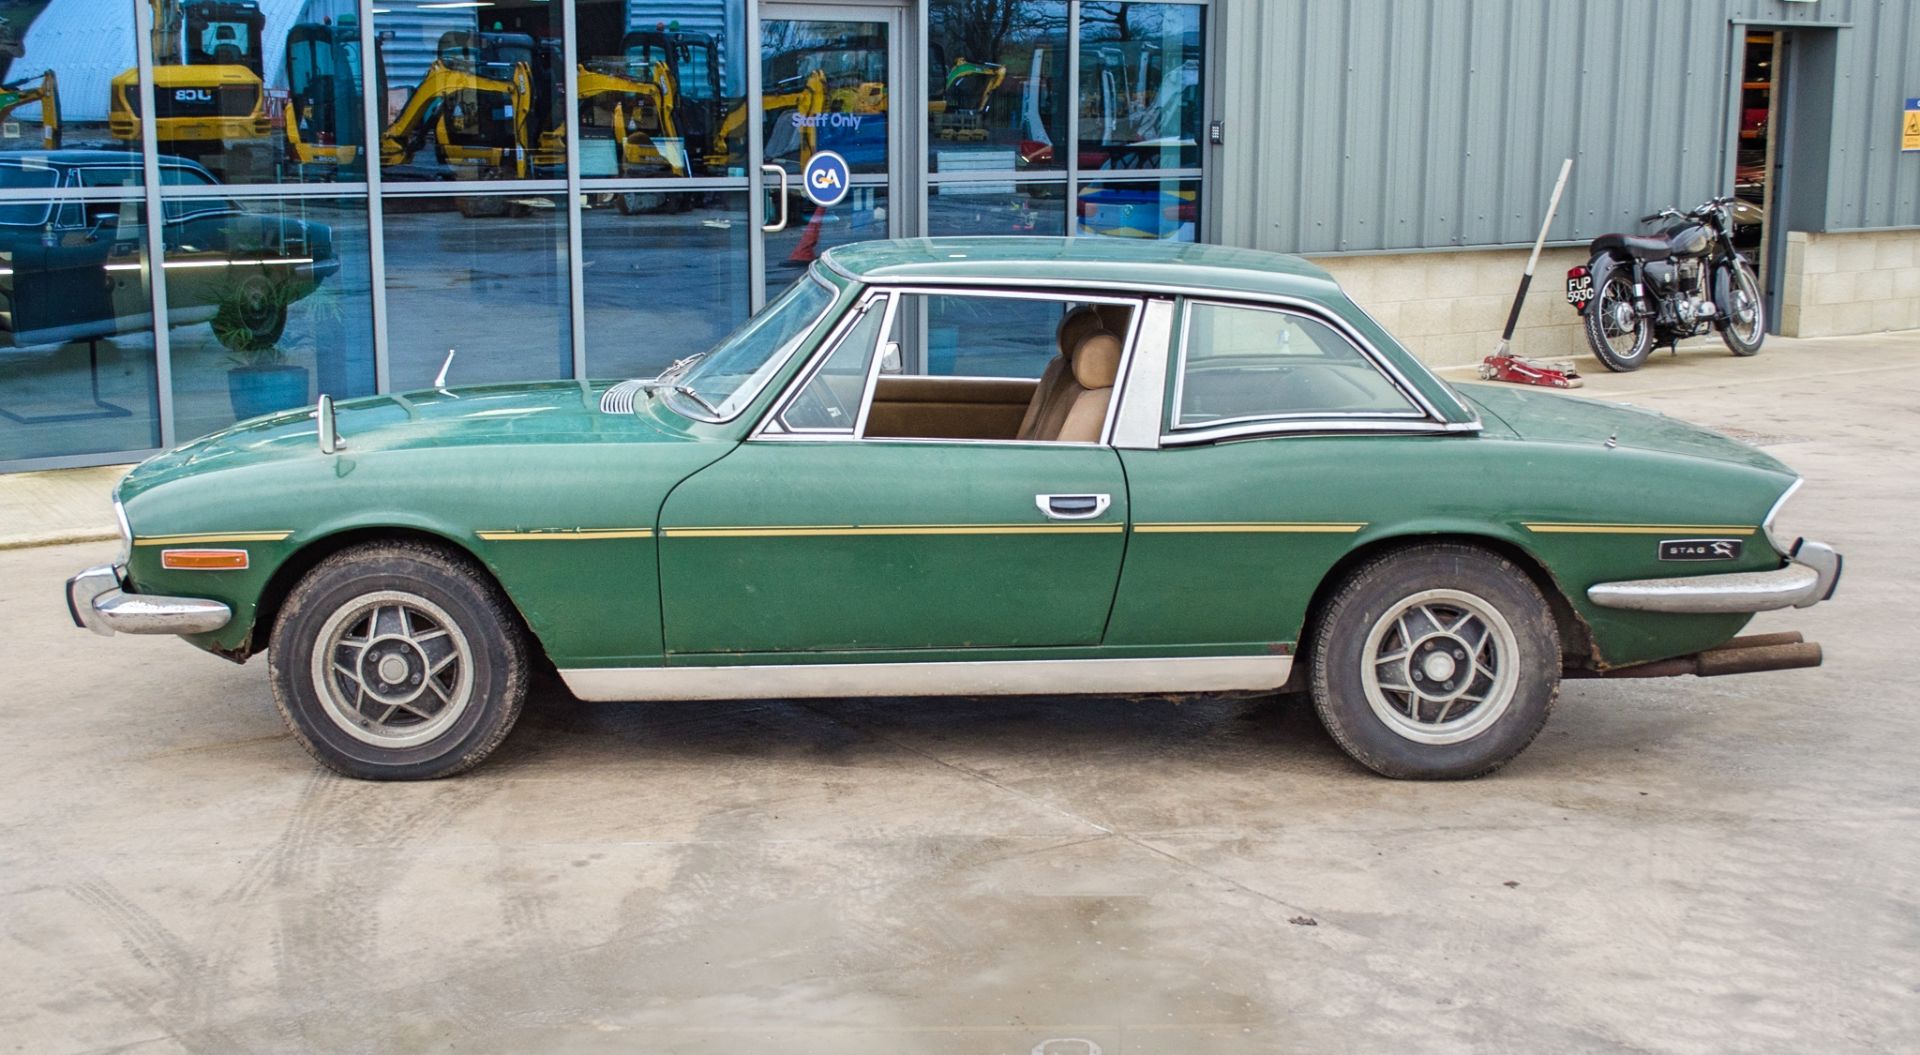 1978 Triumph Stag 3 litre manual 2 door convertible Barn Find - Image 14 of 57